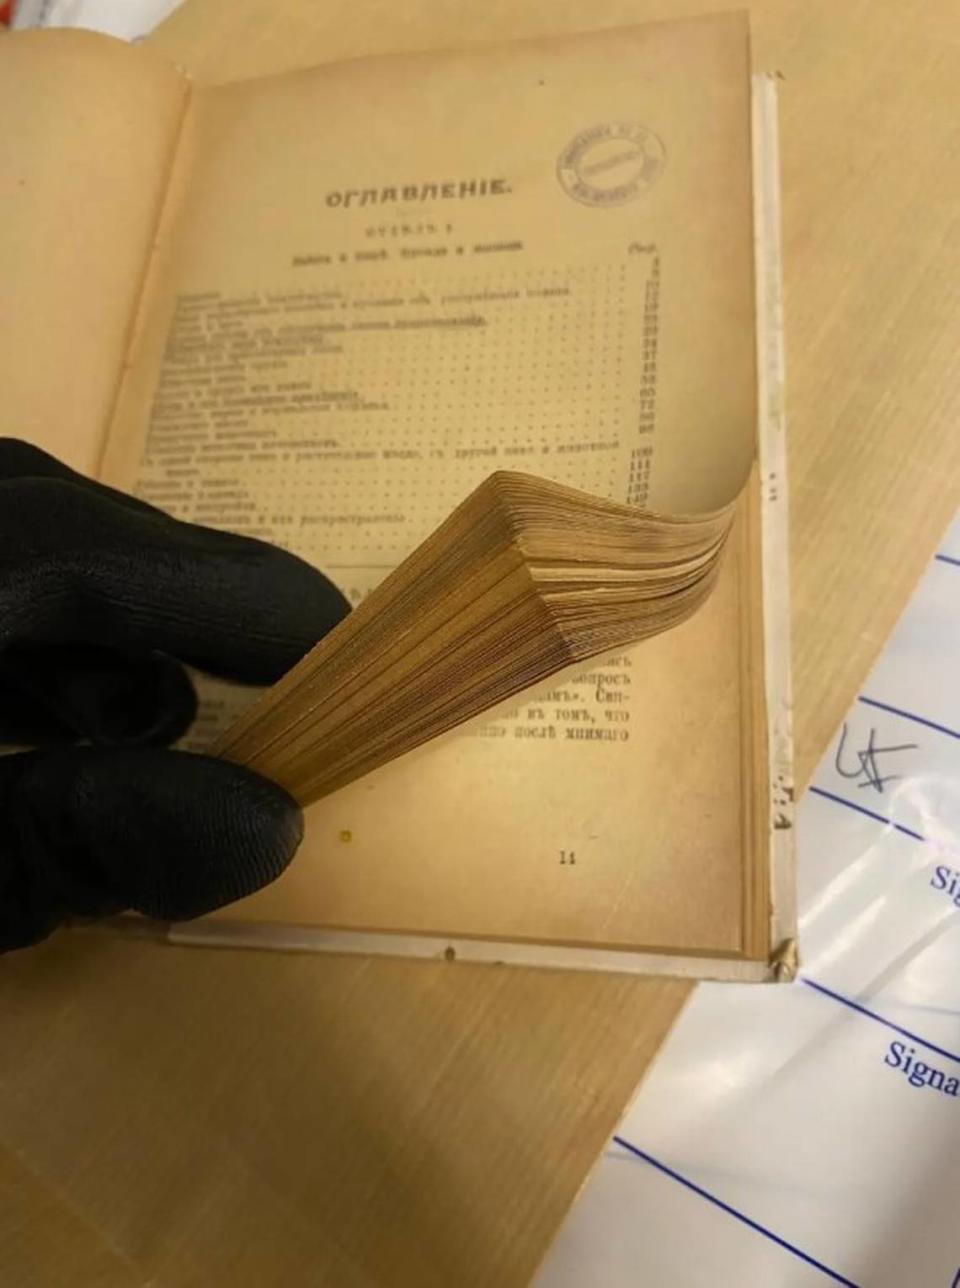 An antique book confiscated by police during the raids. Photo from Europol